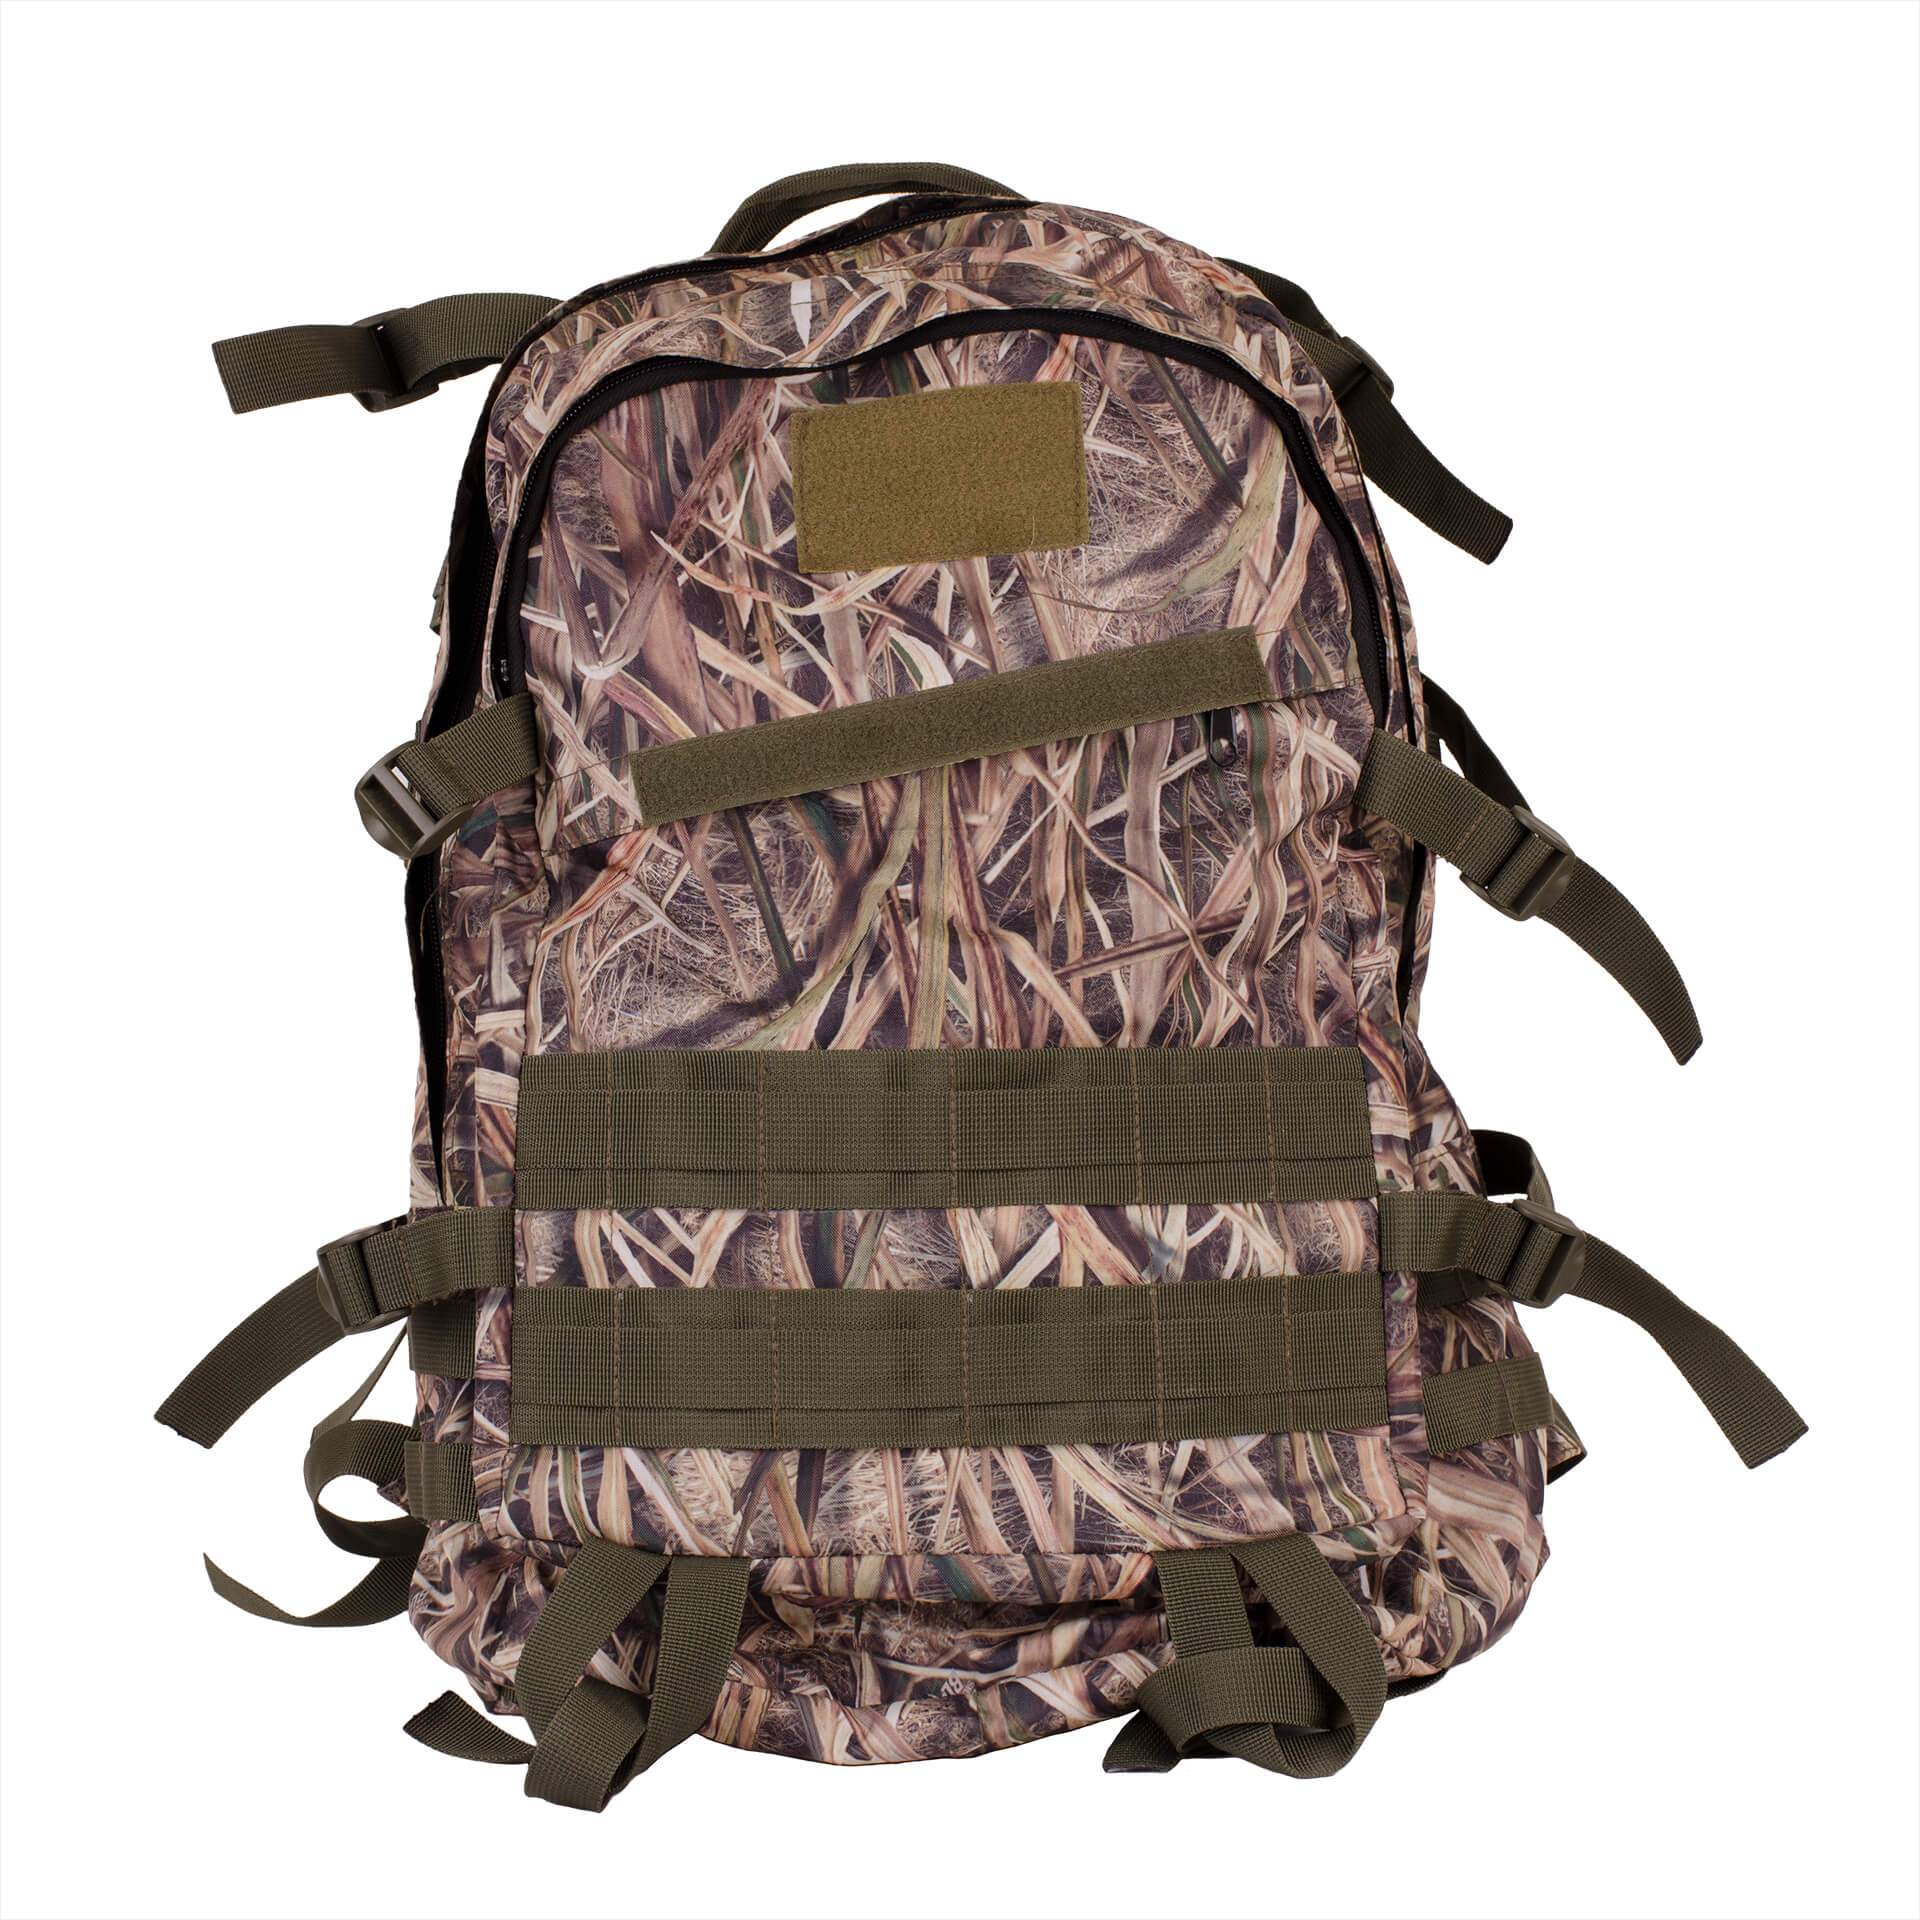 under armour camo hunting backpack Cheaper Than Retail Price> Buy ...